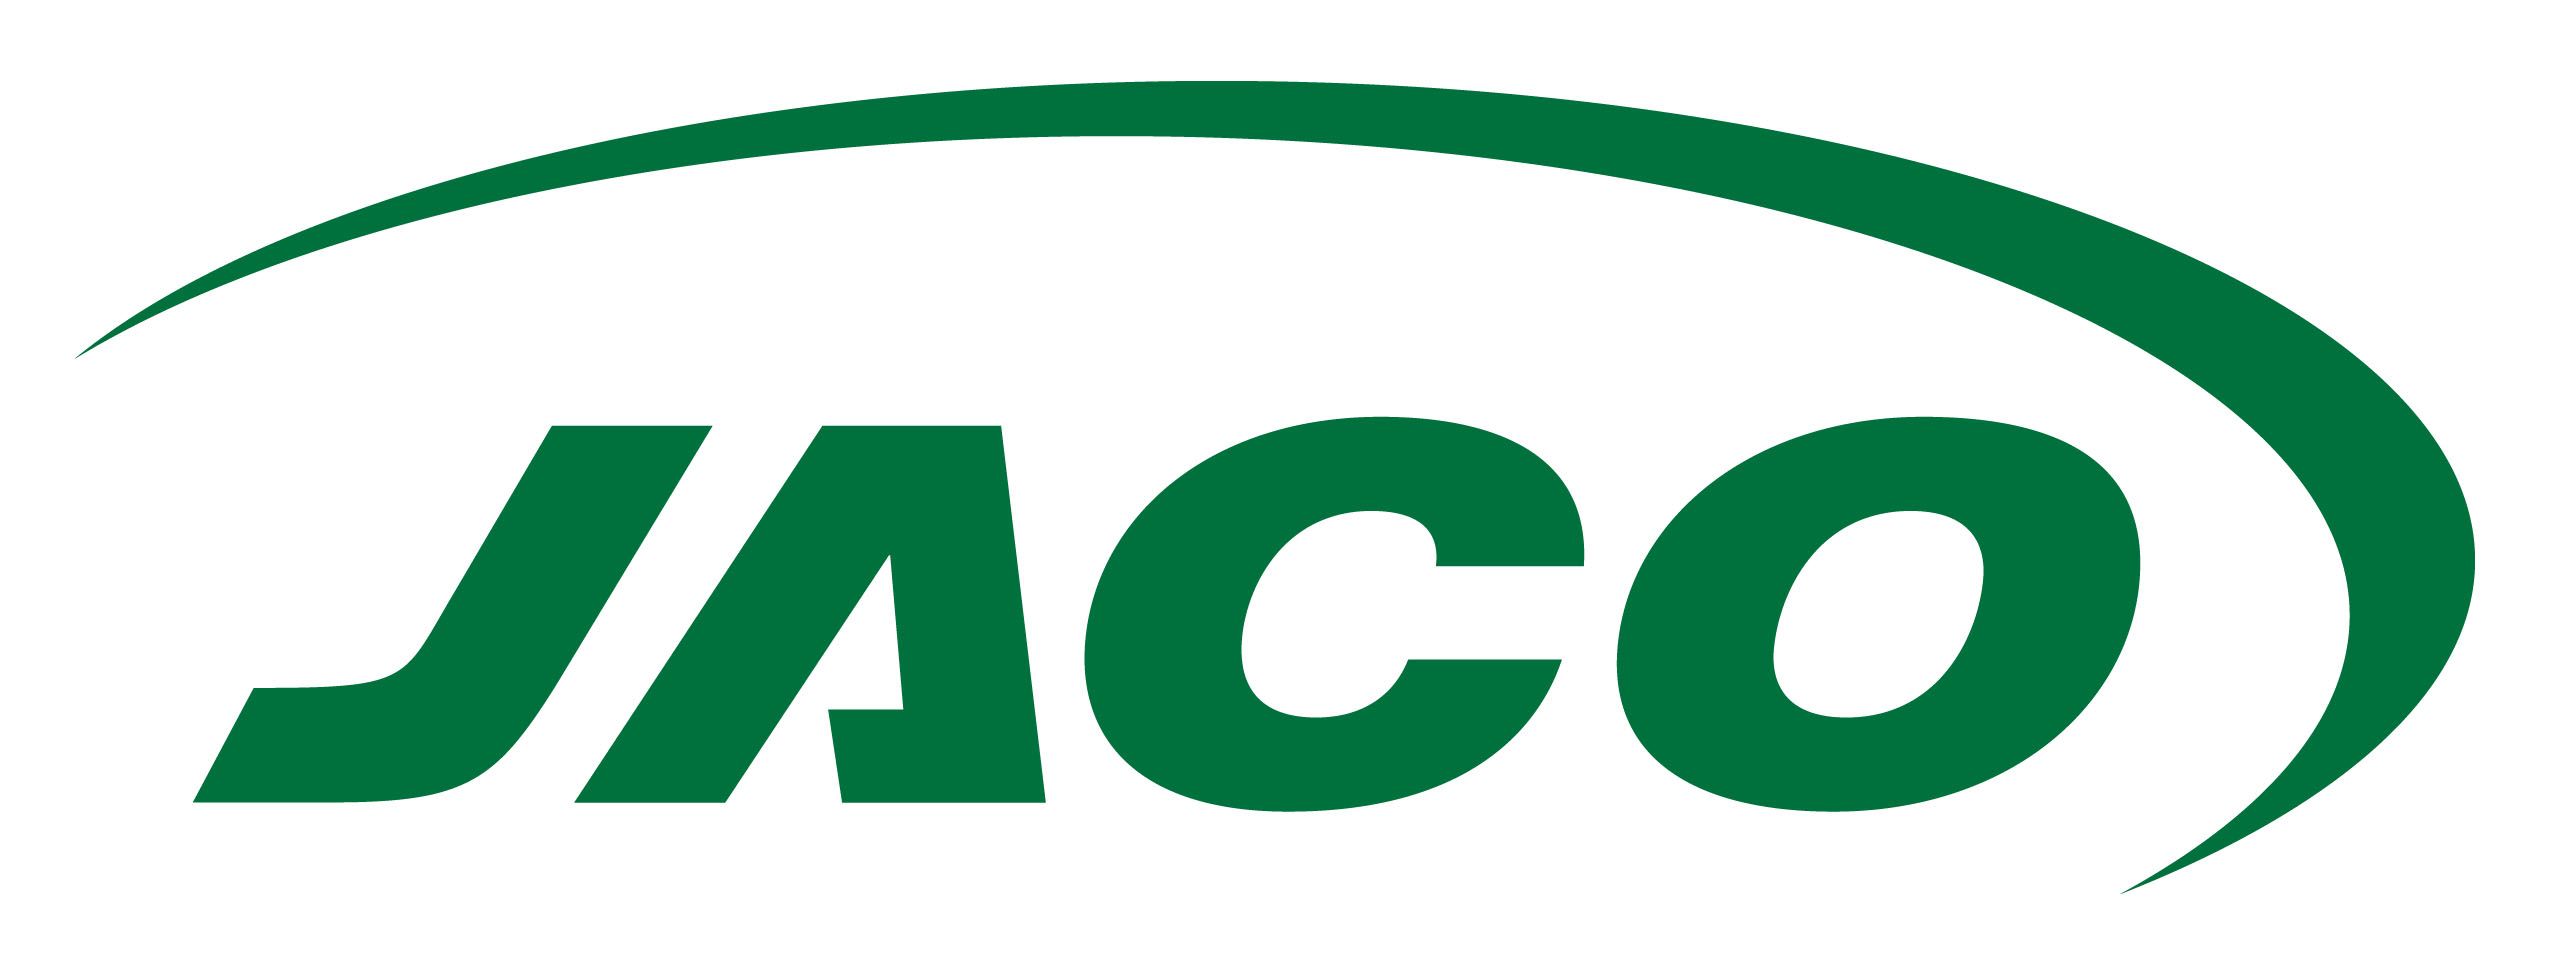 jacoincorporated Logo